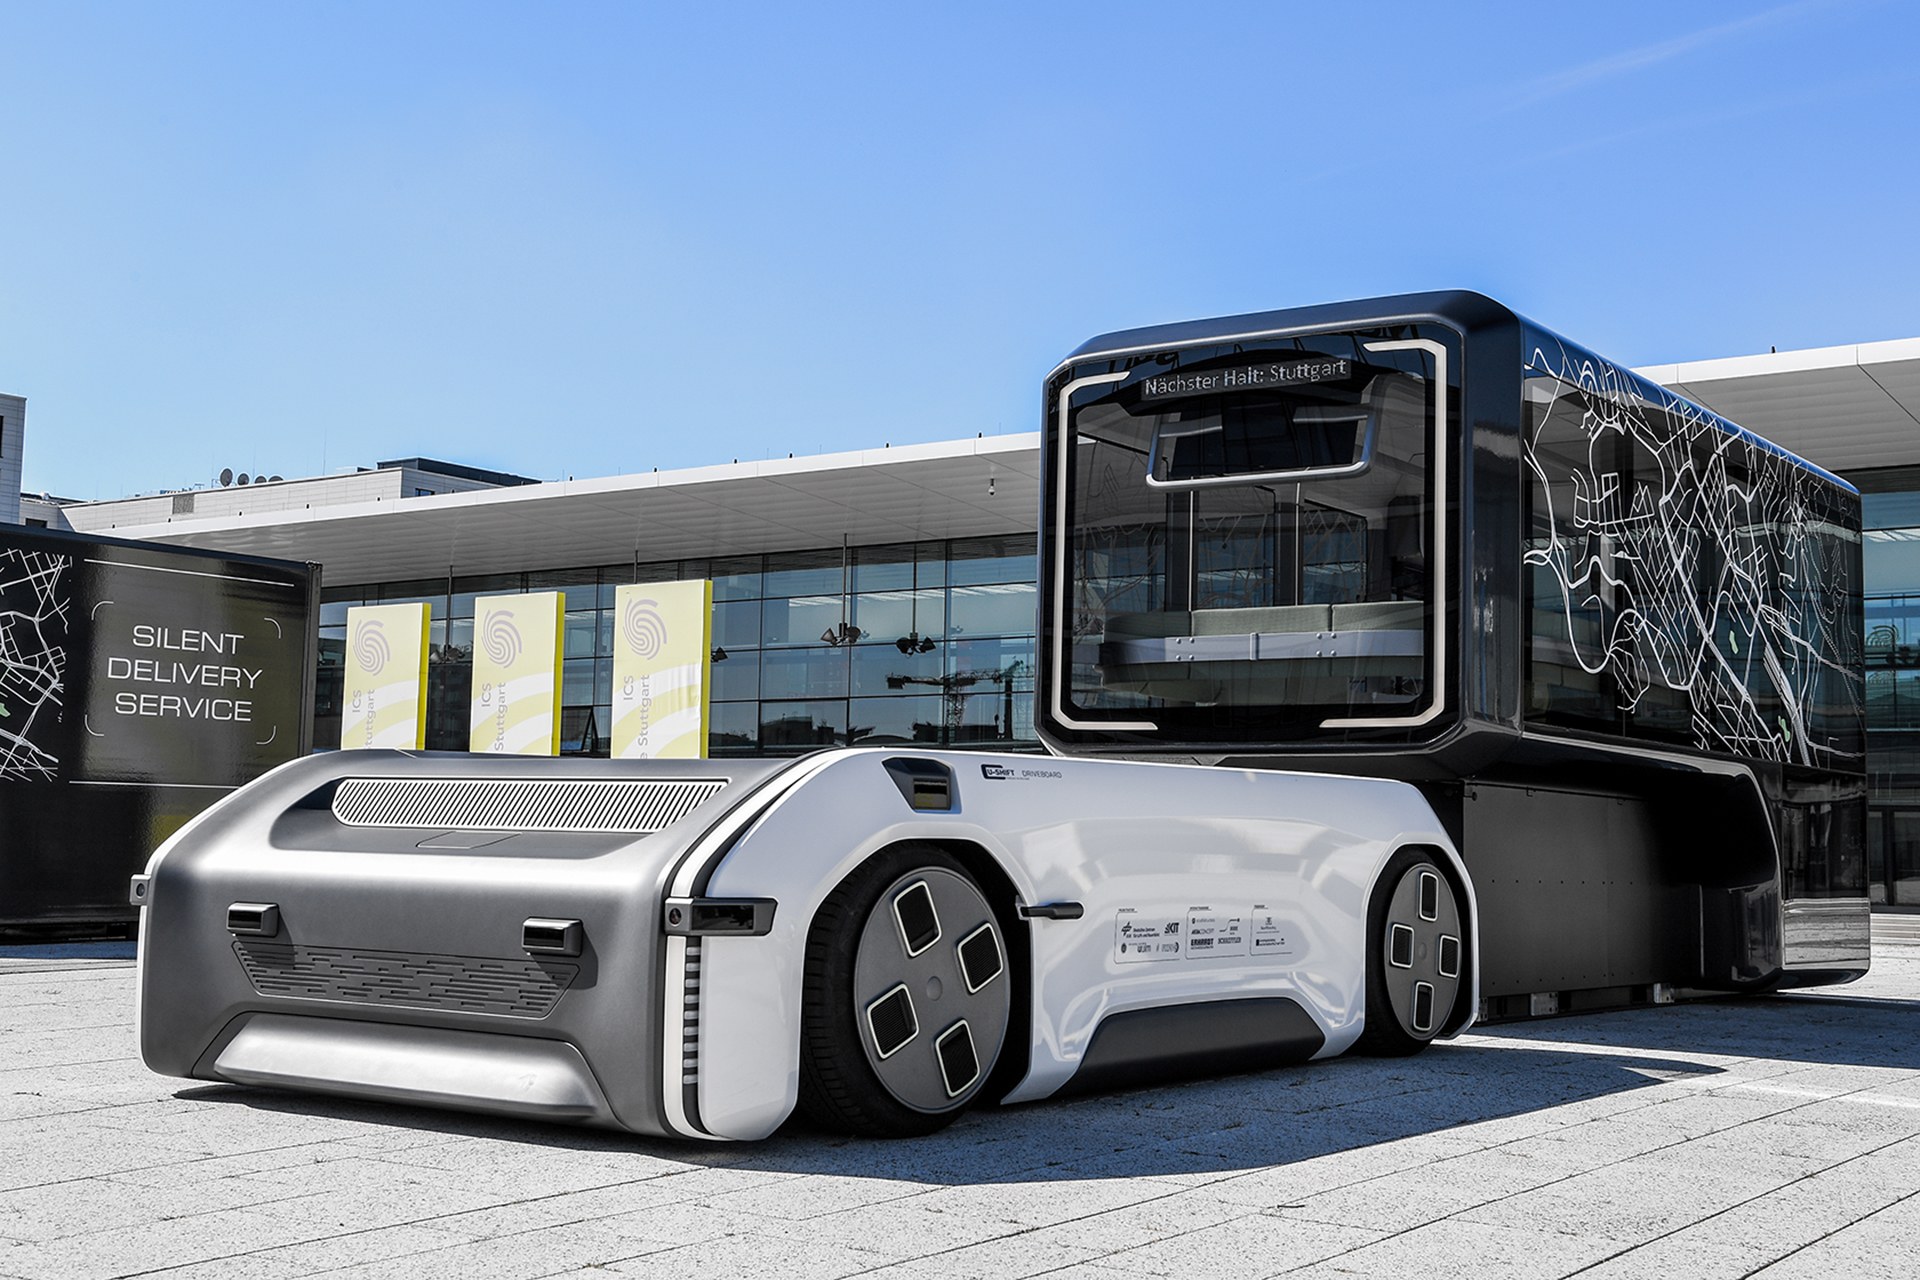 Tomorrow's mobility should be more sustainable, efficient, and comfortable